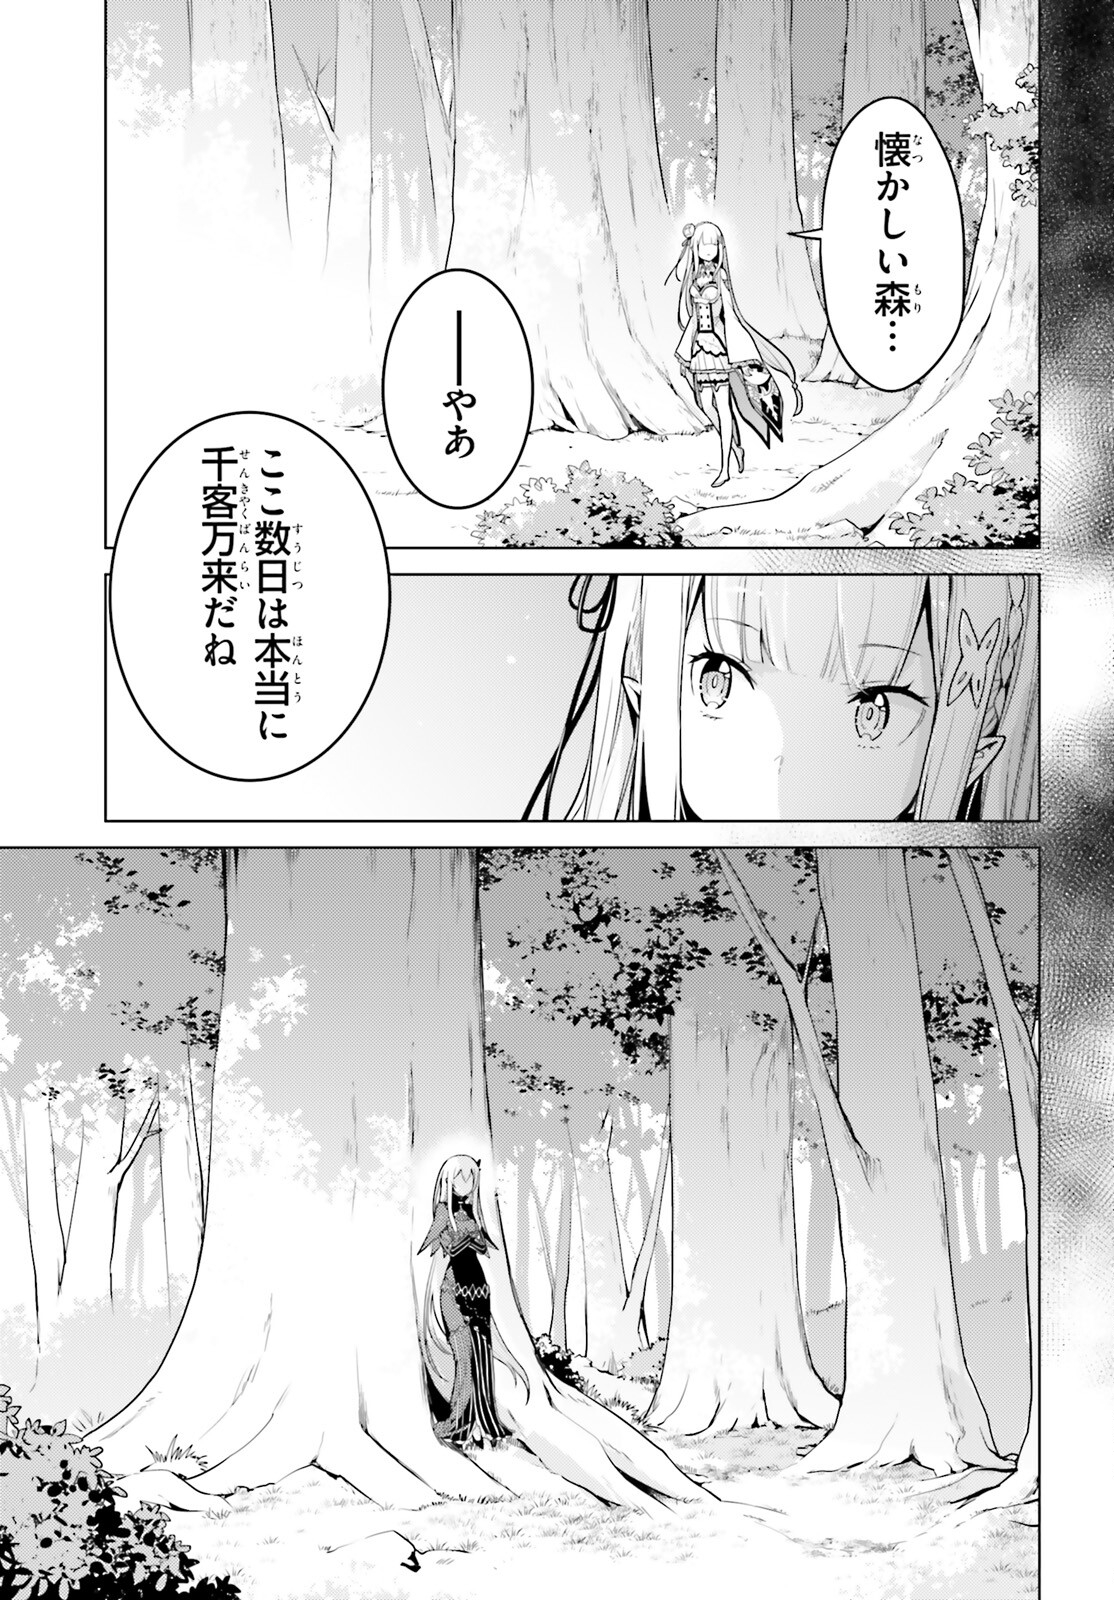 Reゼロから始める異世界生活 第四章 聖域と強欲の魔女 第50話 - Page 23